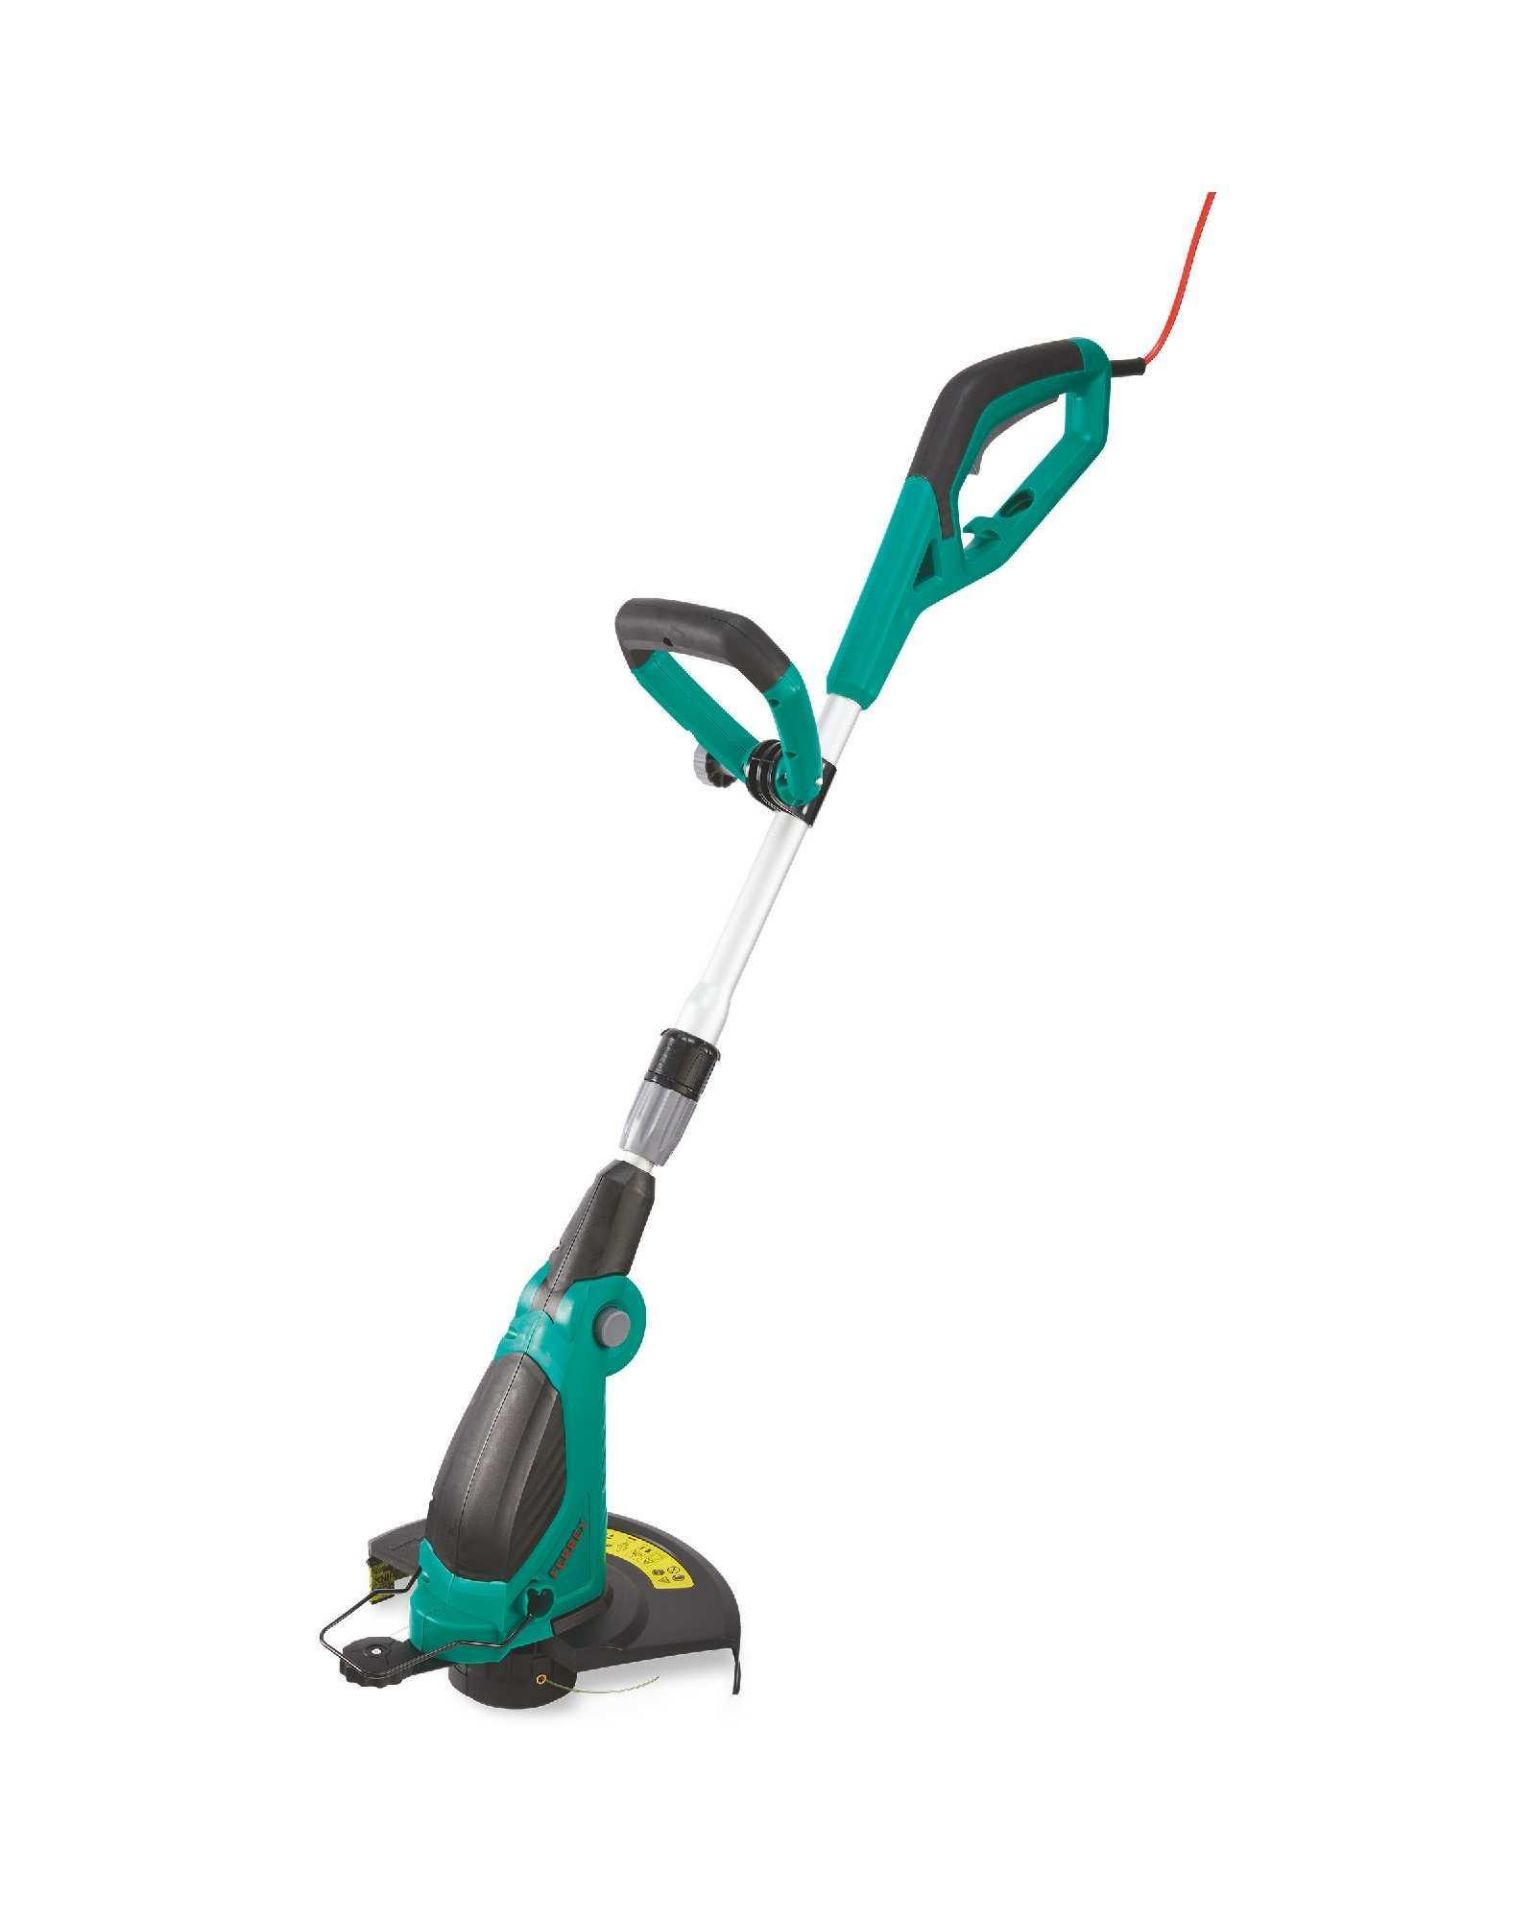 Rrp £70 Boxed Ferrex Electric Lawn Trimmer